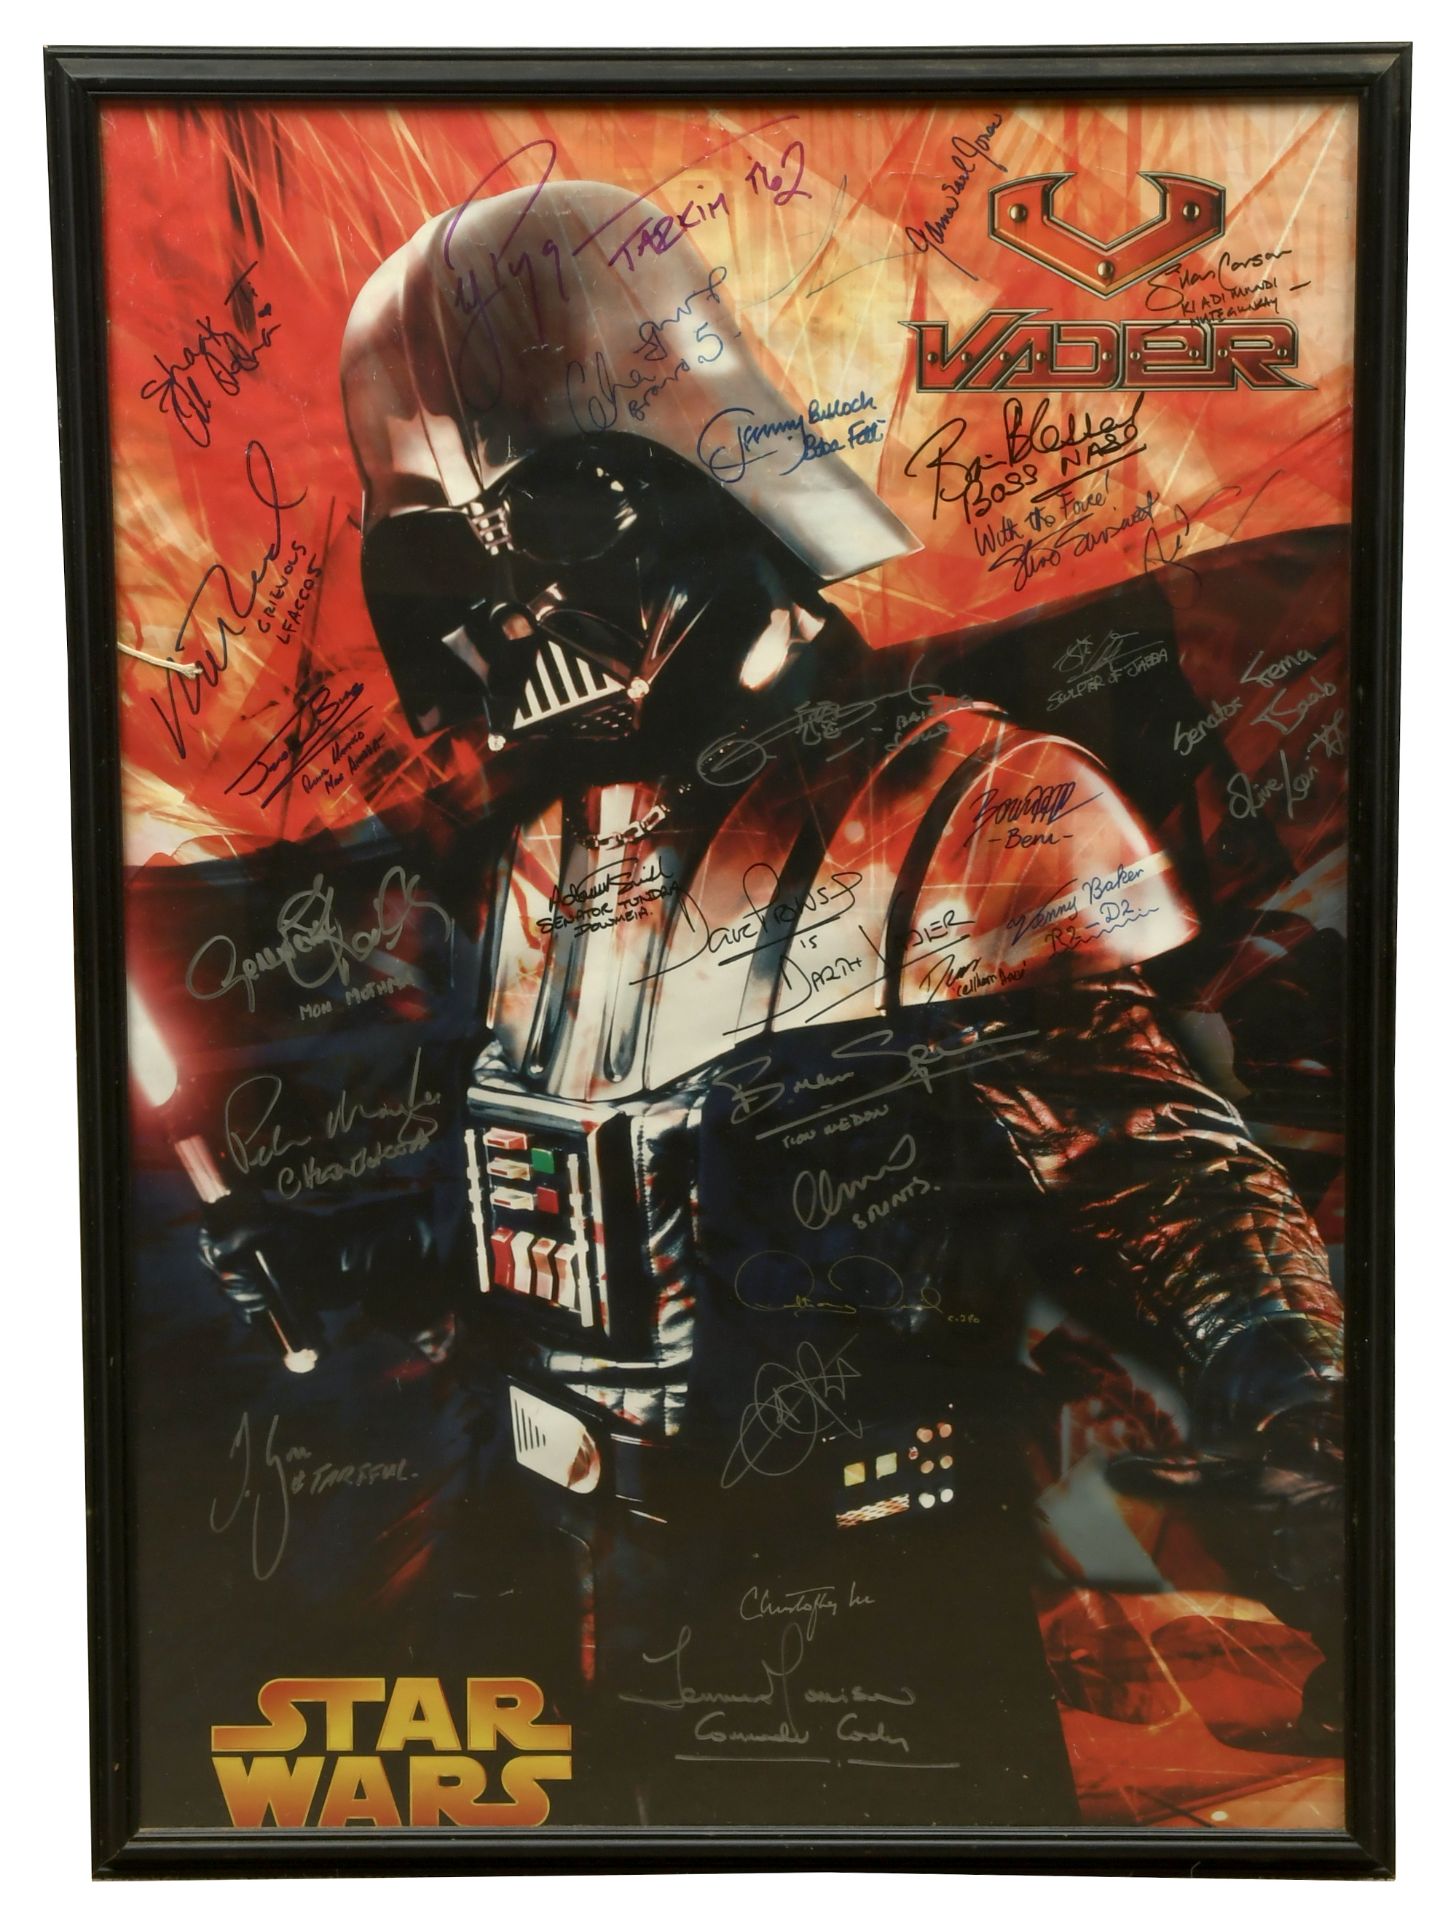 Star Wars prequel poster, signed by multiple cast members